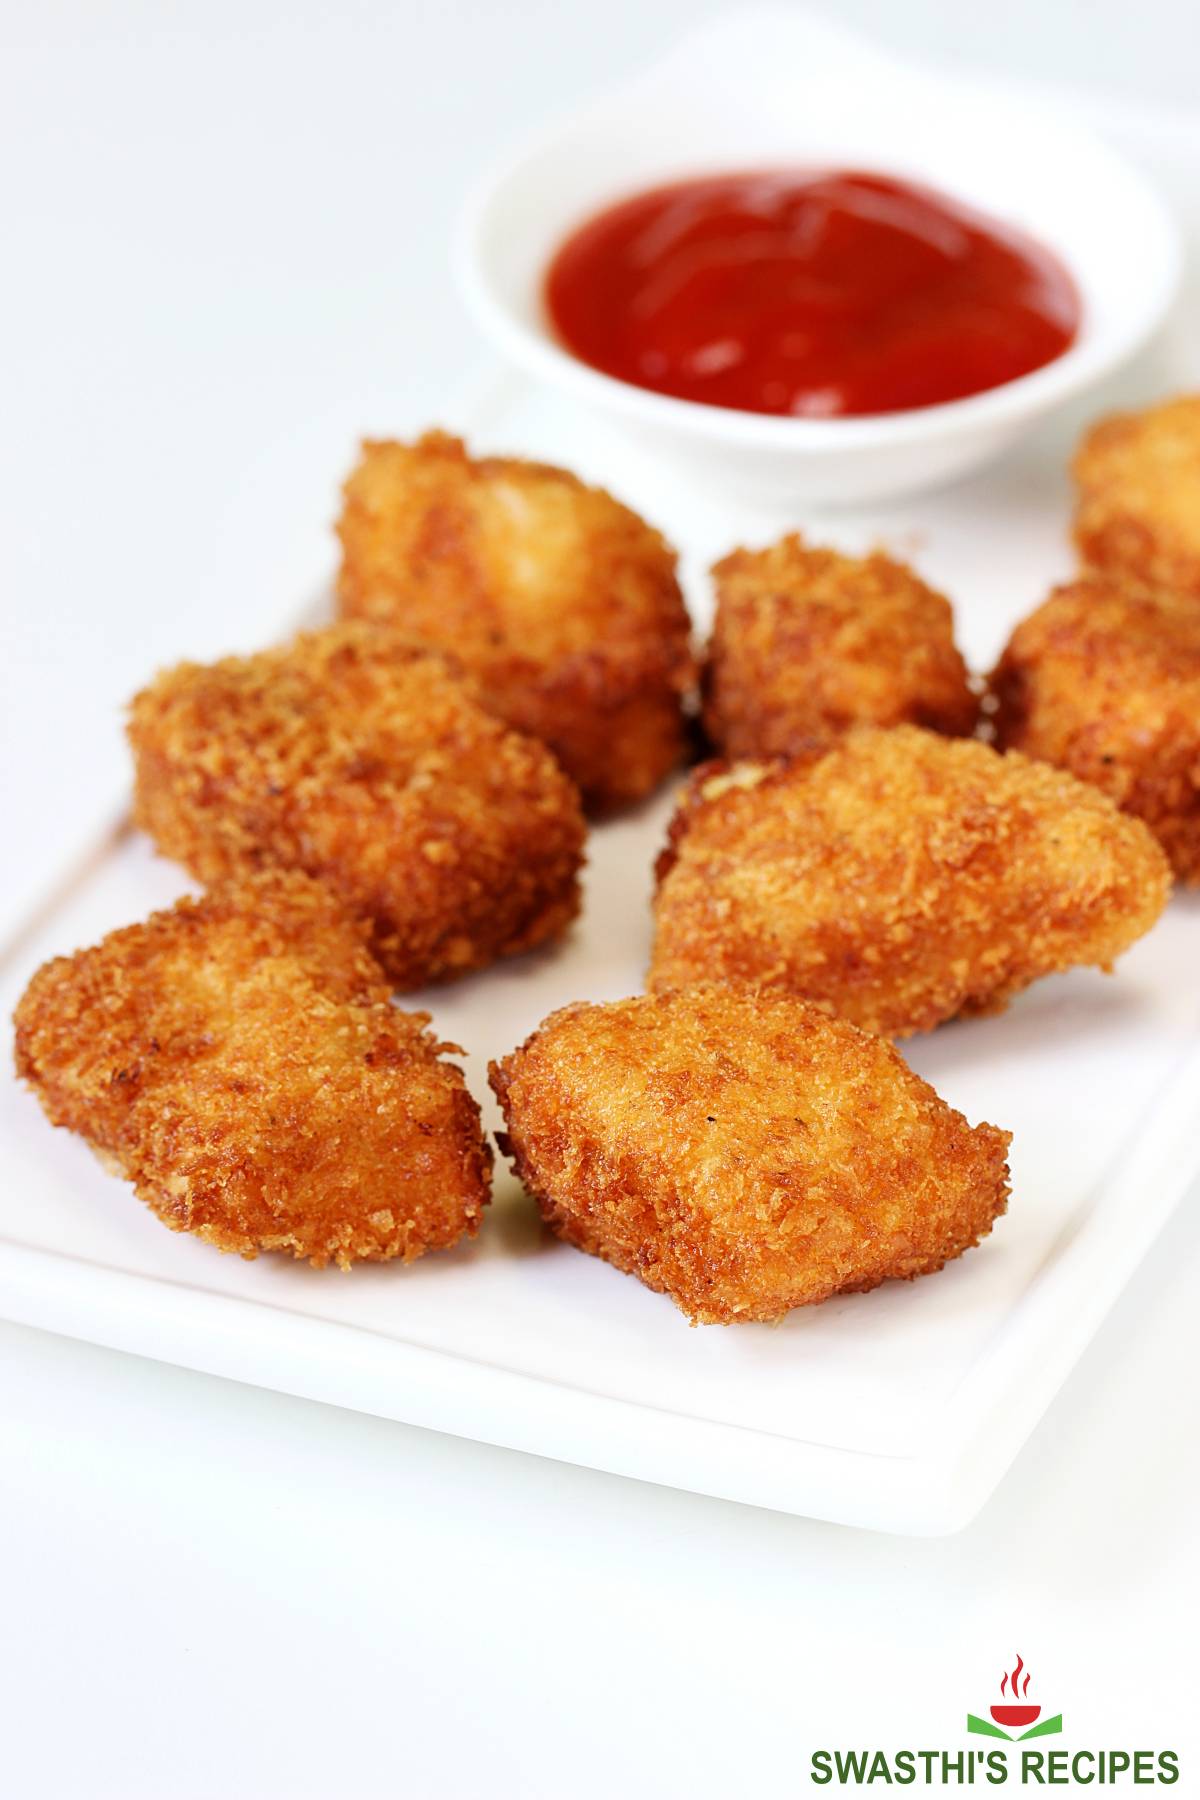 Chicken Nuggets Recipe (Fried, Baked & Air fryer) - Swasthi's Recipes